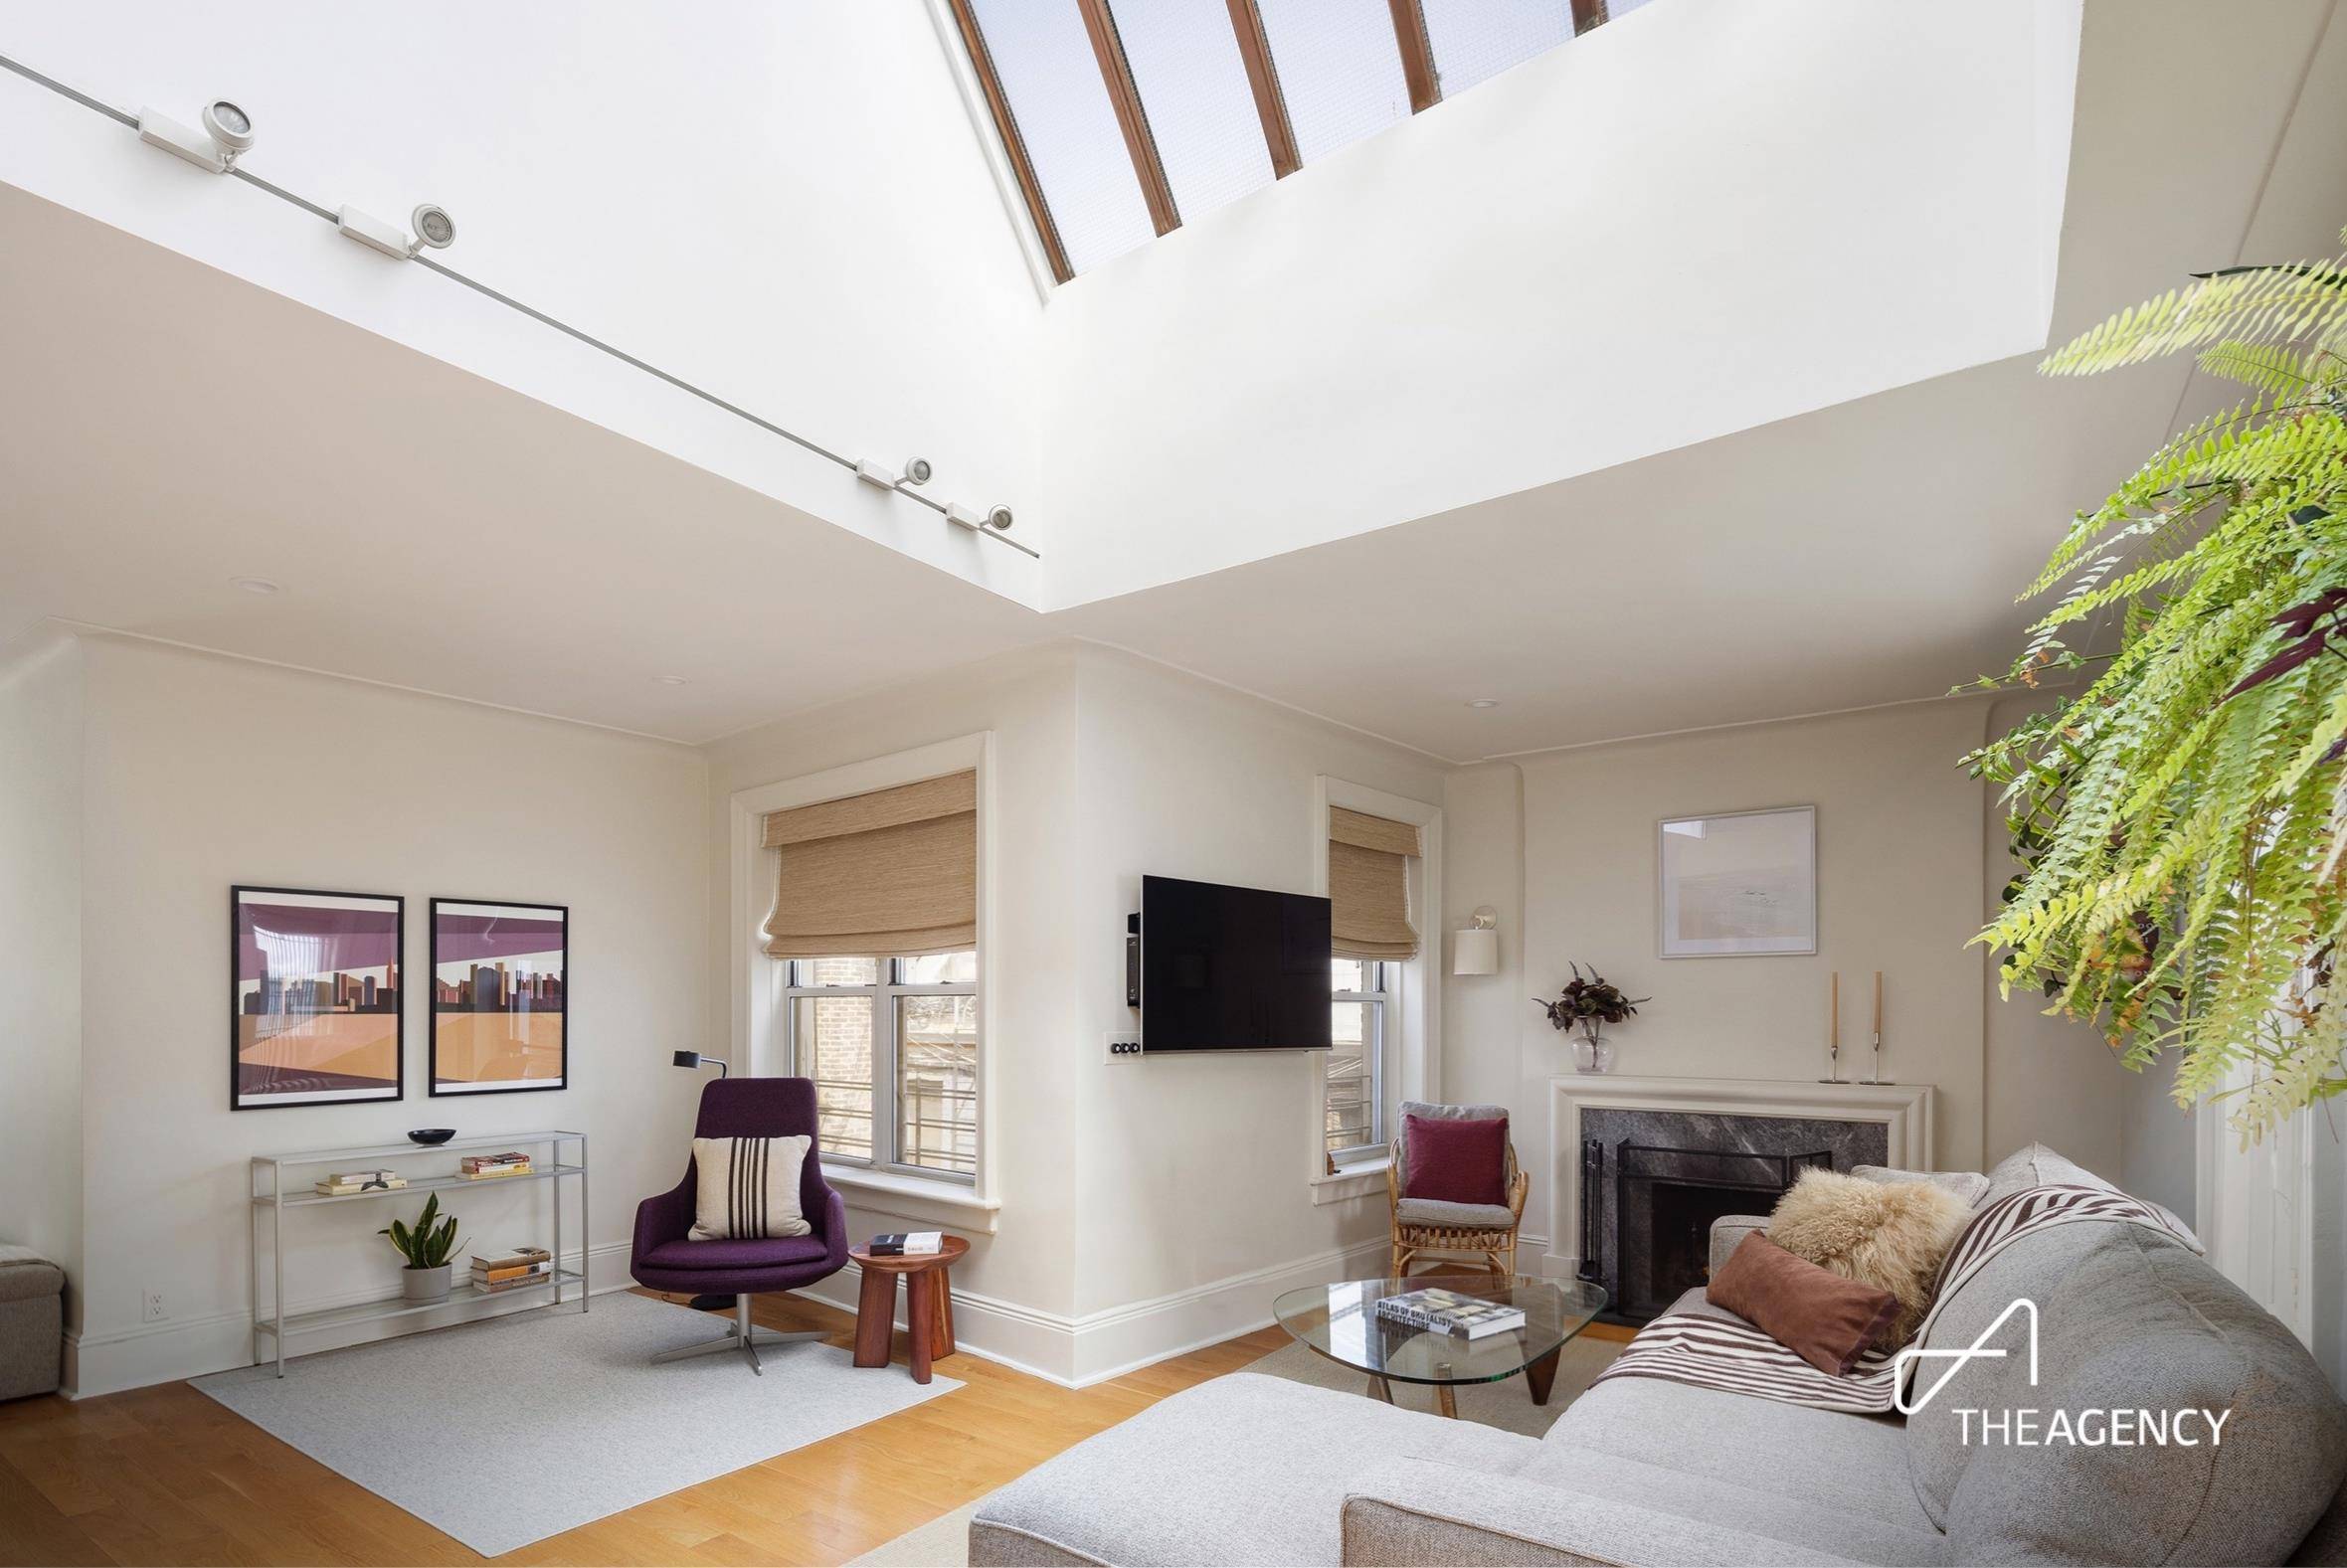 Live the West Village Dream in this newly renovated, spacious, light filled duplex.